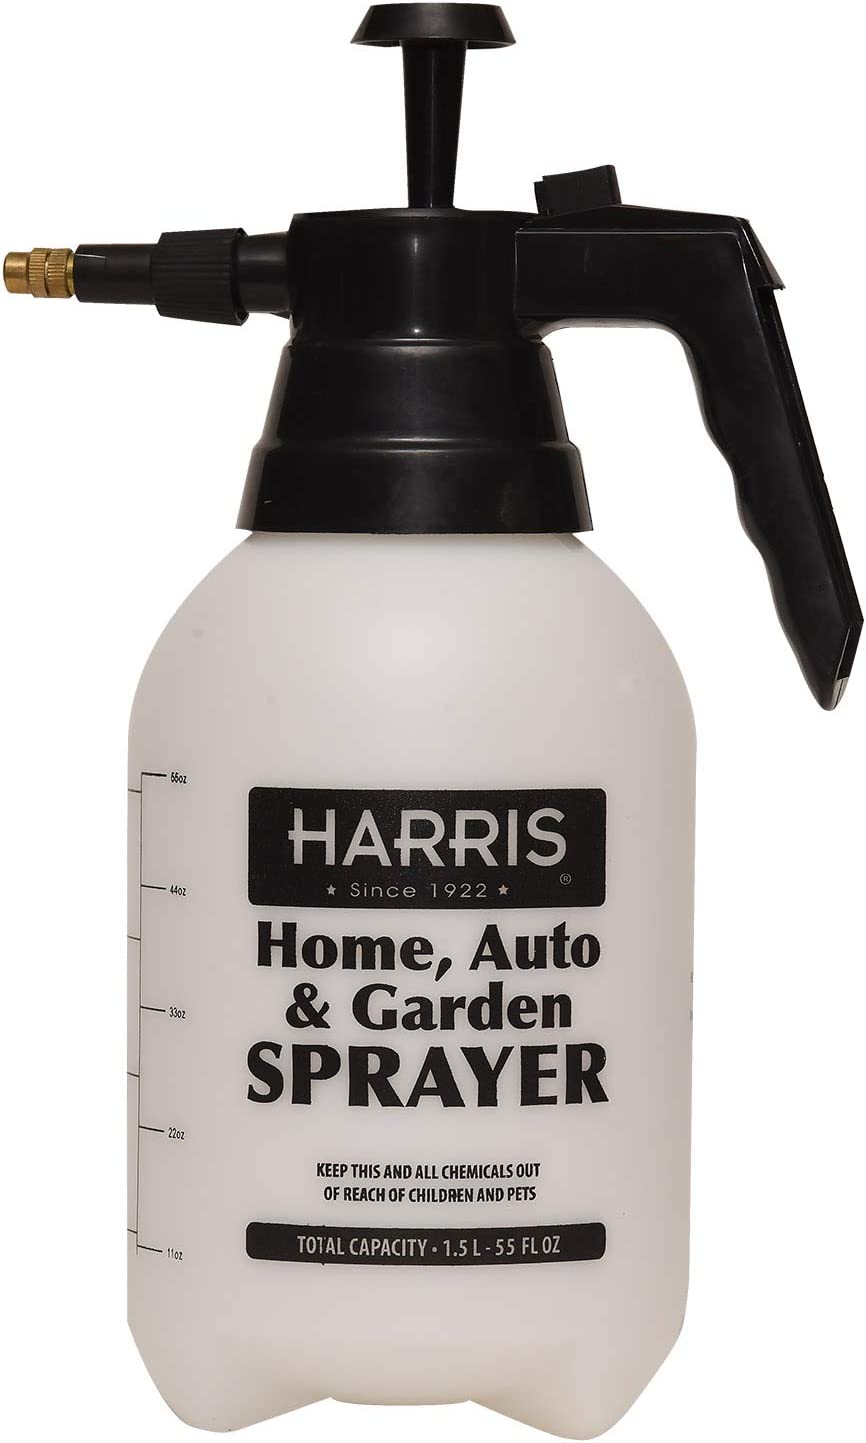 HARRIS Continuous Hand Pump Pressure Sprayer for Home, [...]